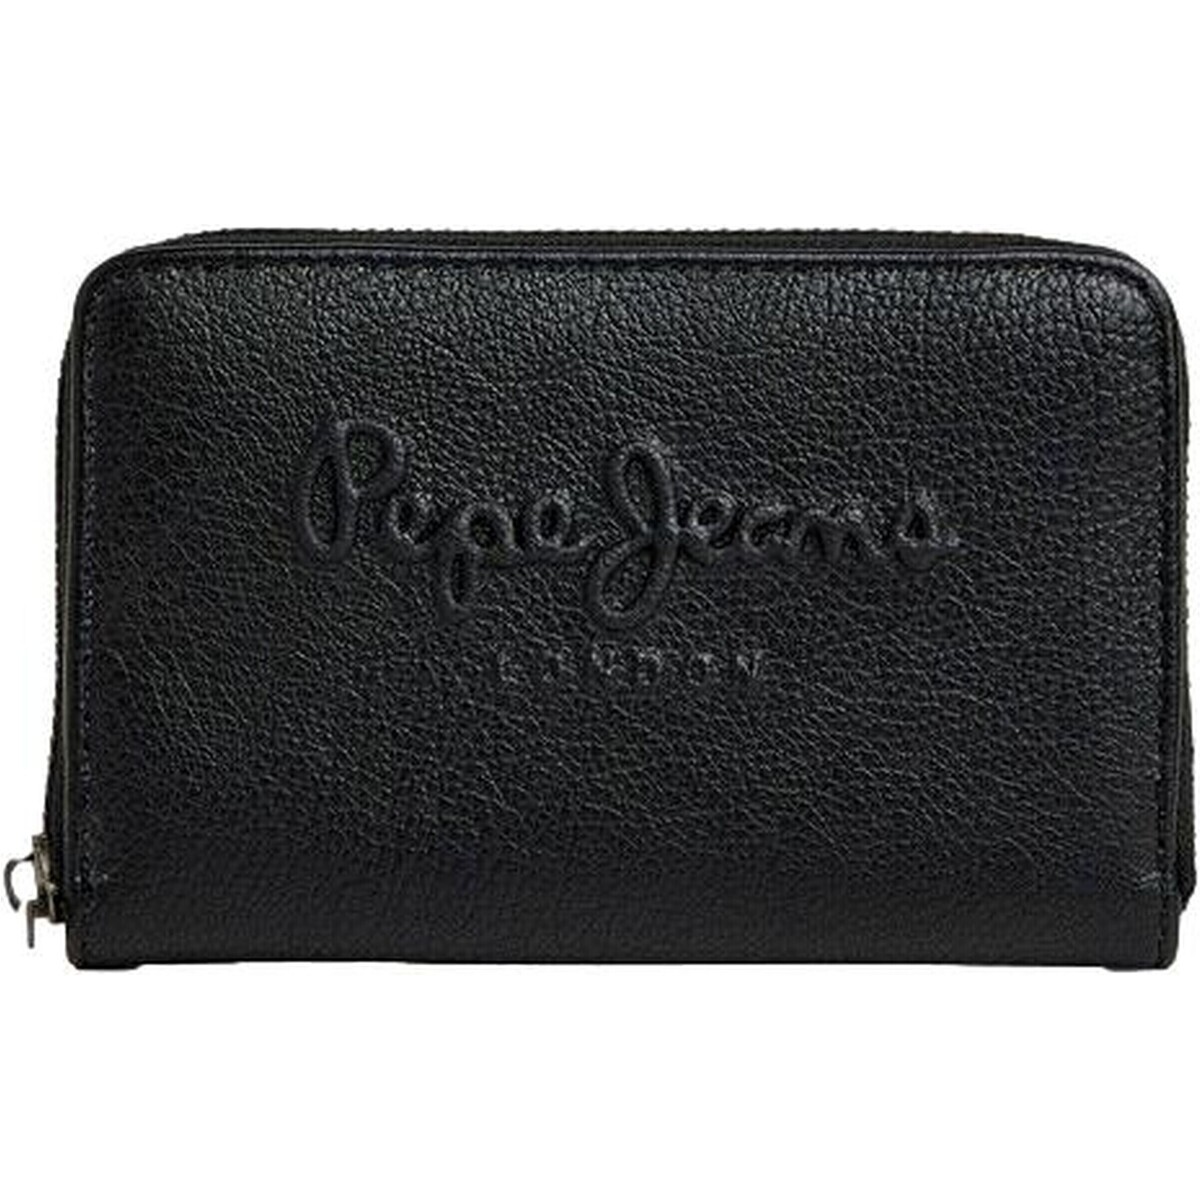 Tassen Dames Portefeuilles Pepe jeans CARTERA MANO LOGO RELIEVE MUJER   PL070201 Other